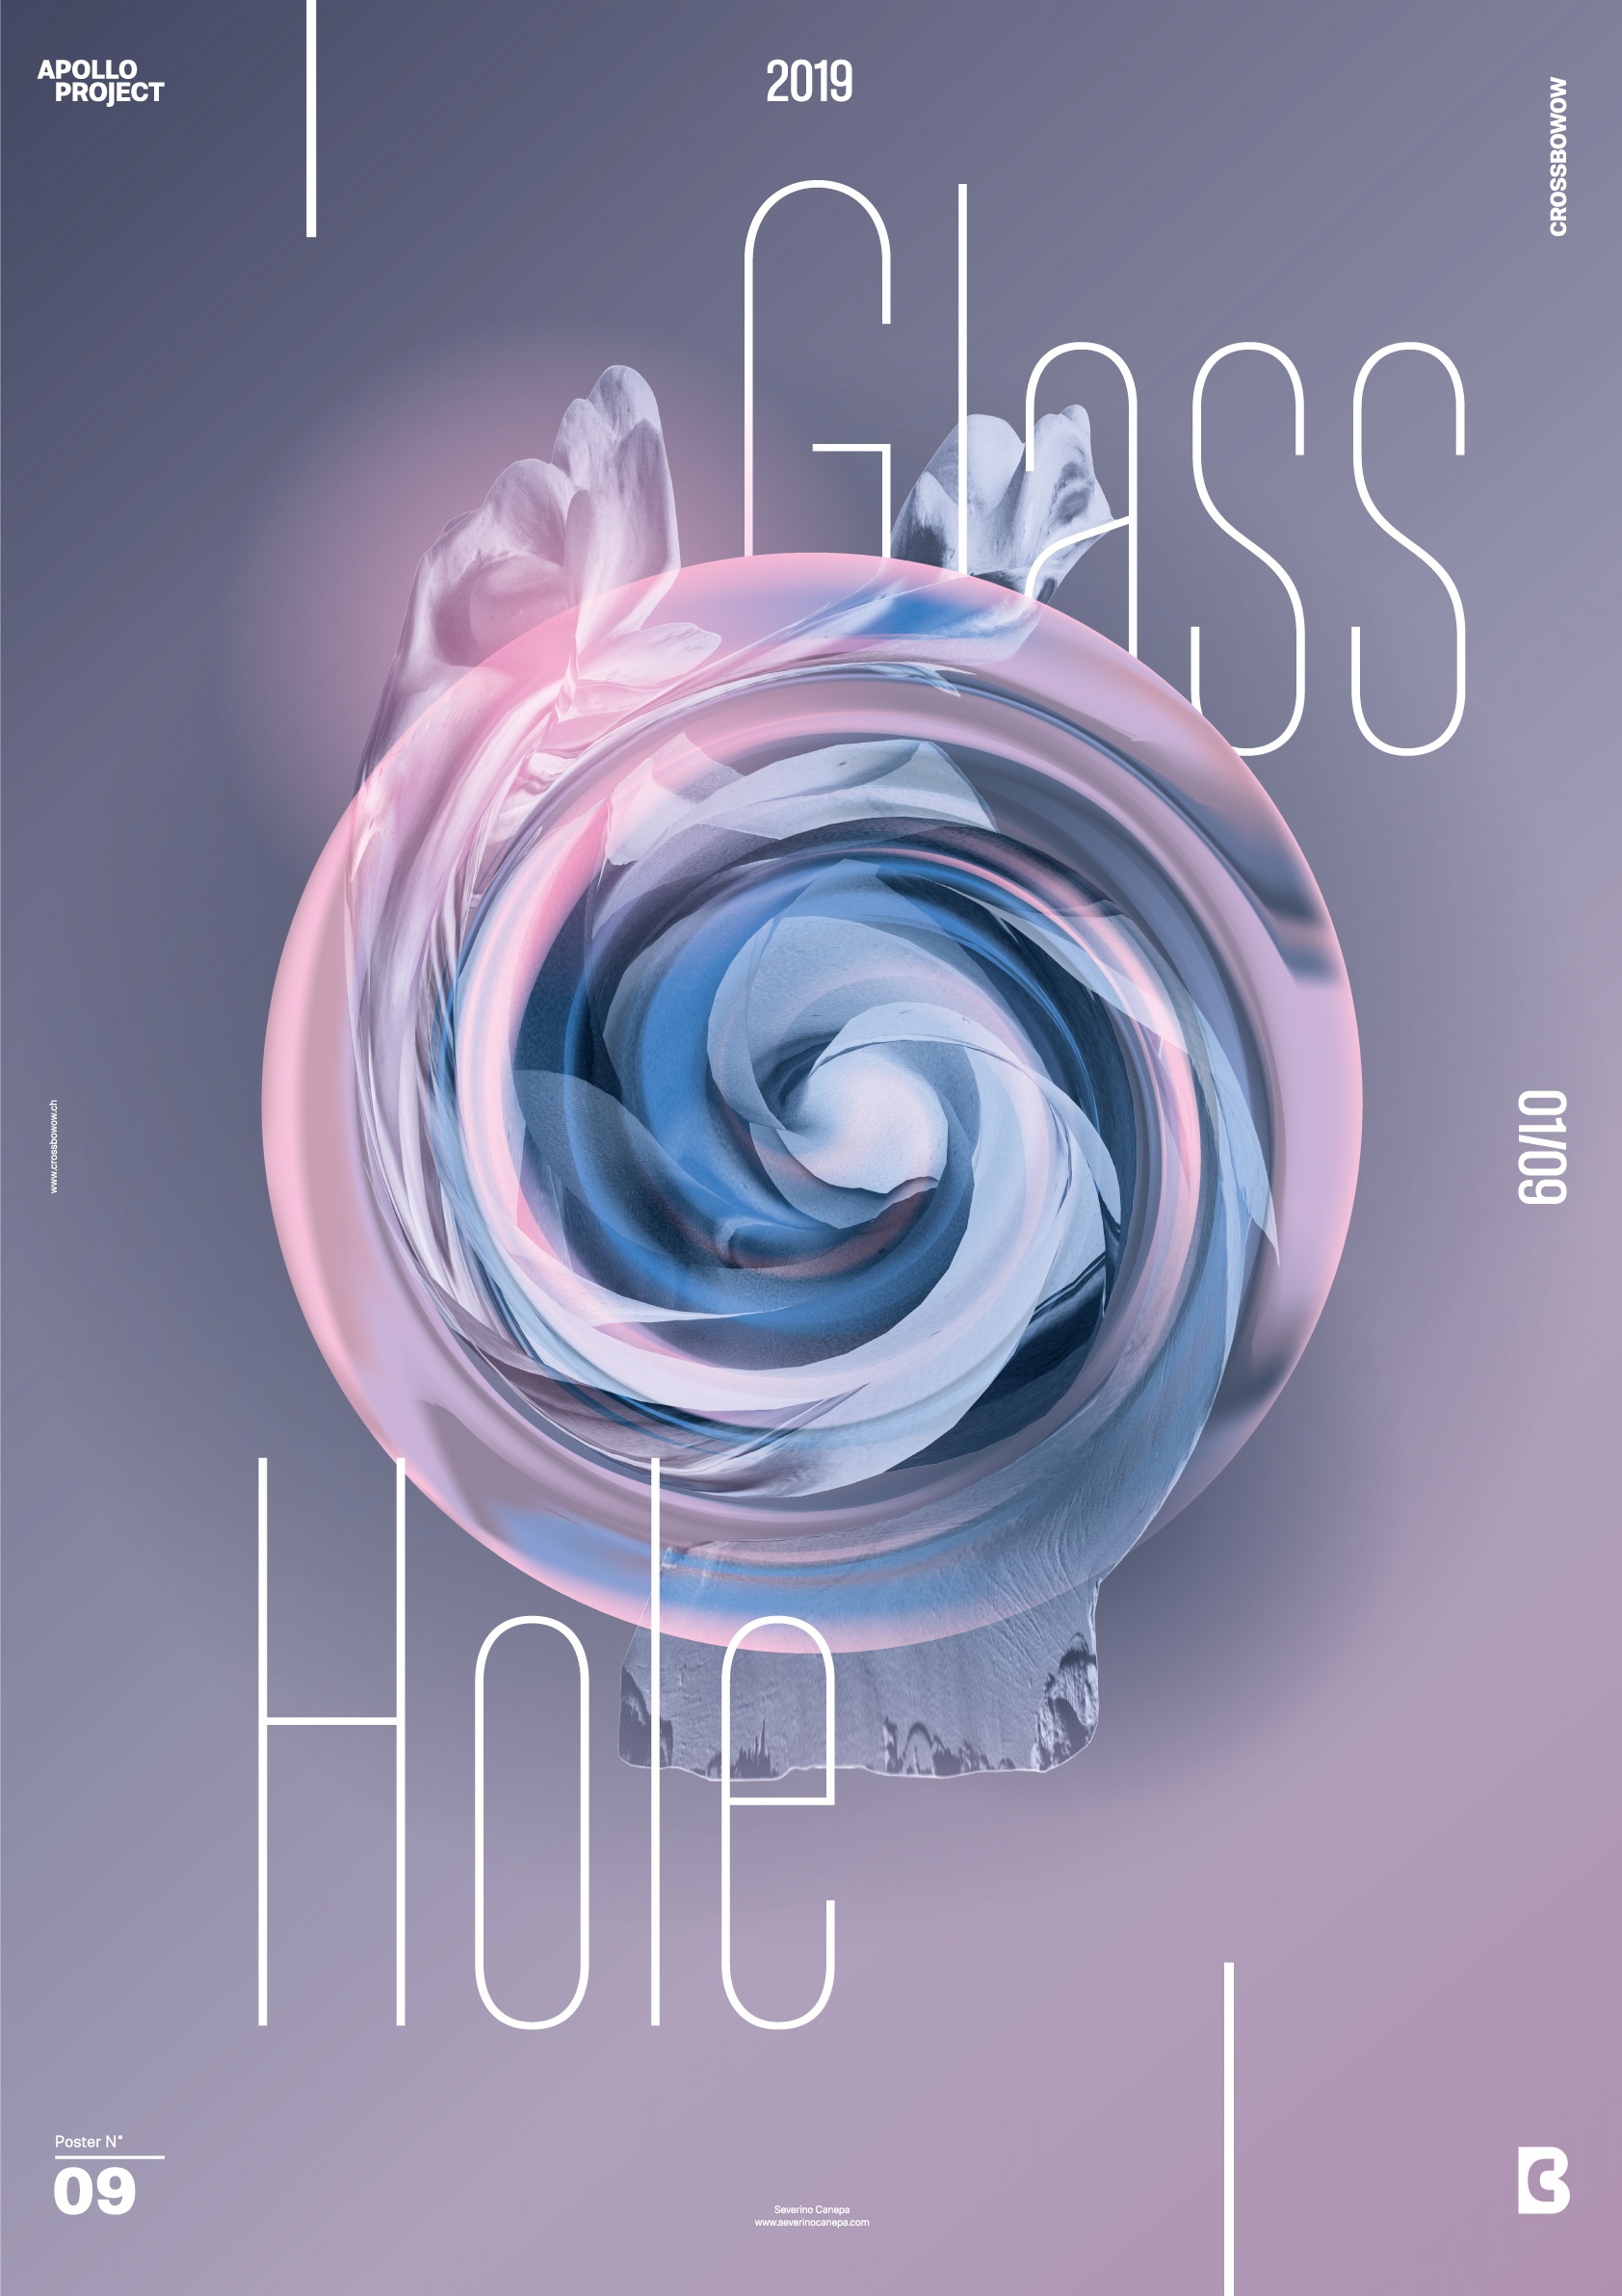 The Poster's Design number 9 named Glass Hole